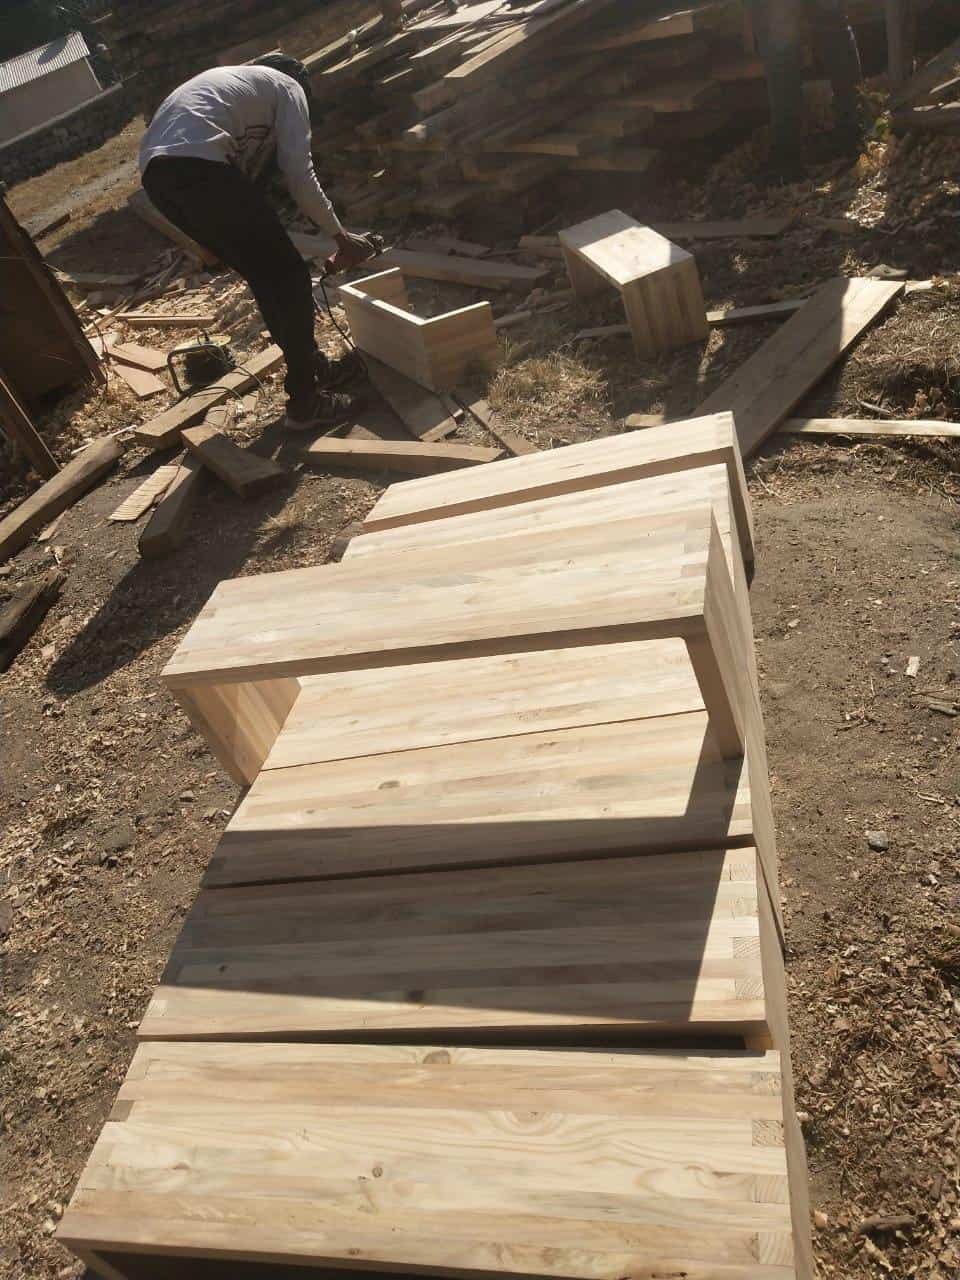 A carpenter builds benches for the students to sit on during the upcoming school year in Yangri